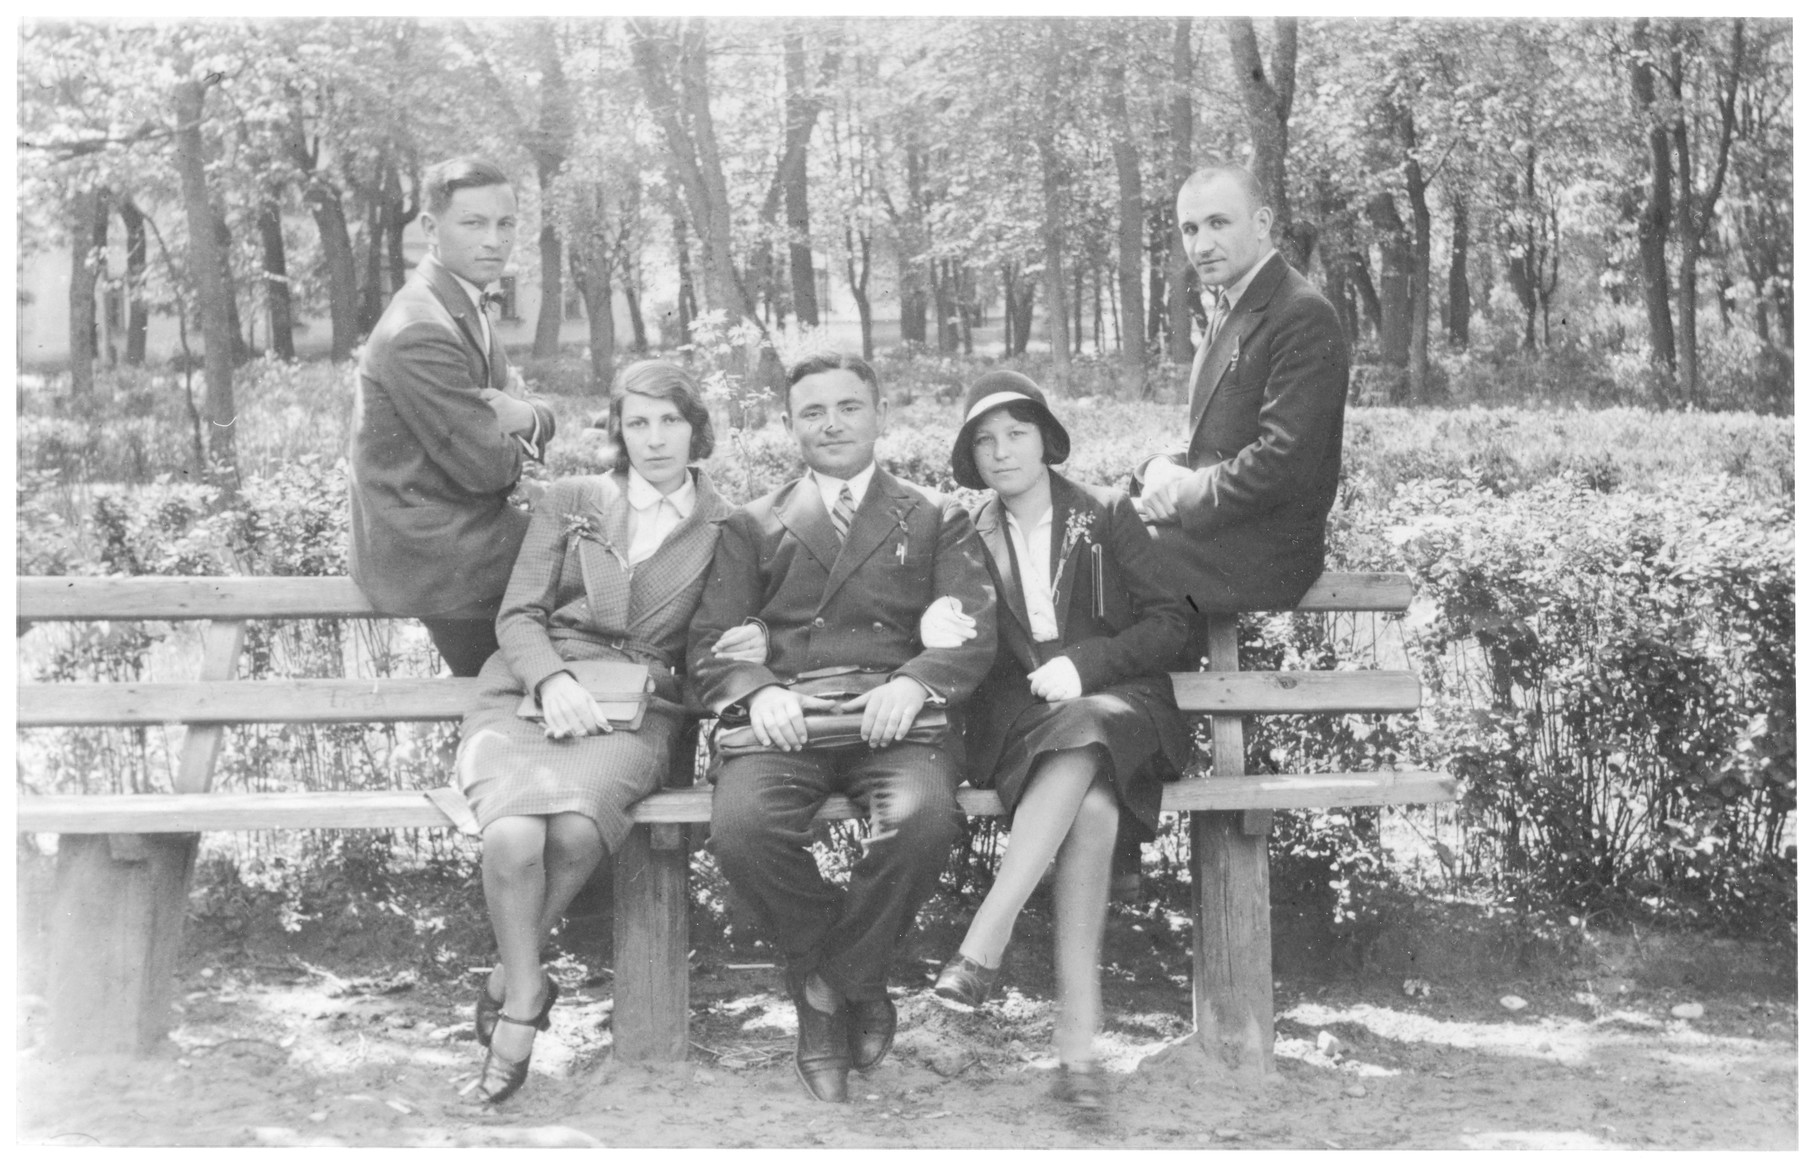 Jewish students pose on a bench at the University of Vilna.

Seated from left to right are: Rusia and her brother Abrasha Knyszynsky, Raya Markon and Max Heller (behind on the right).